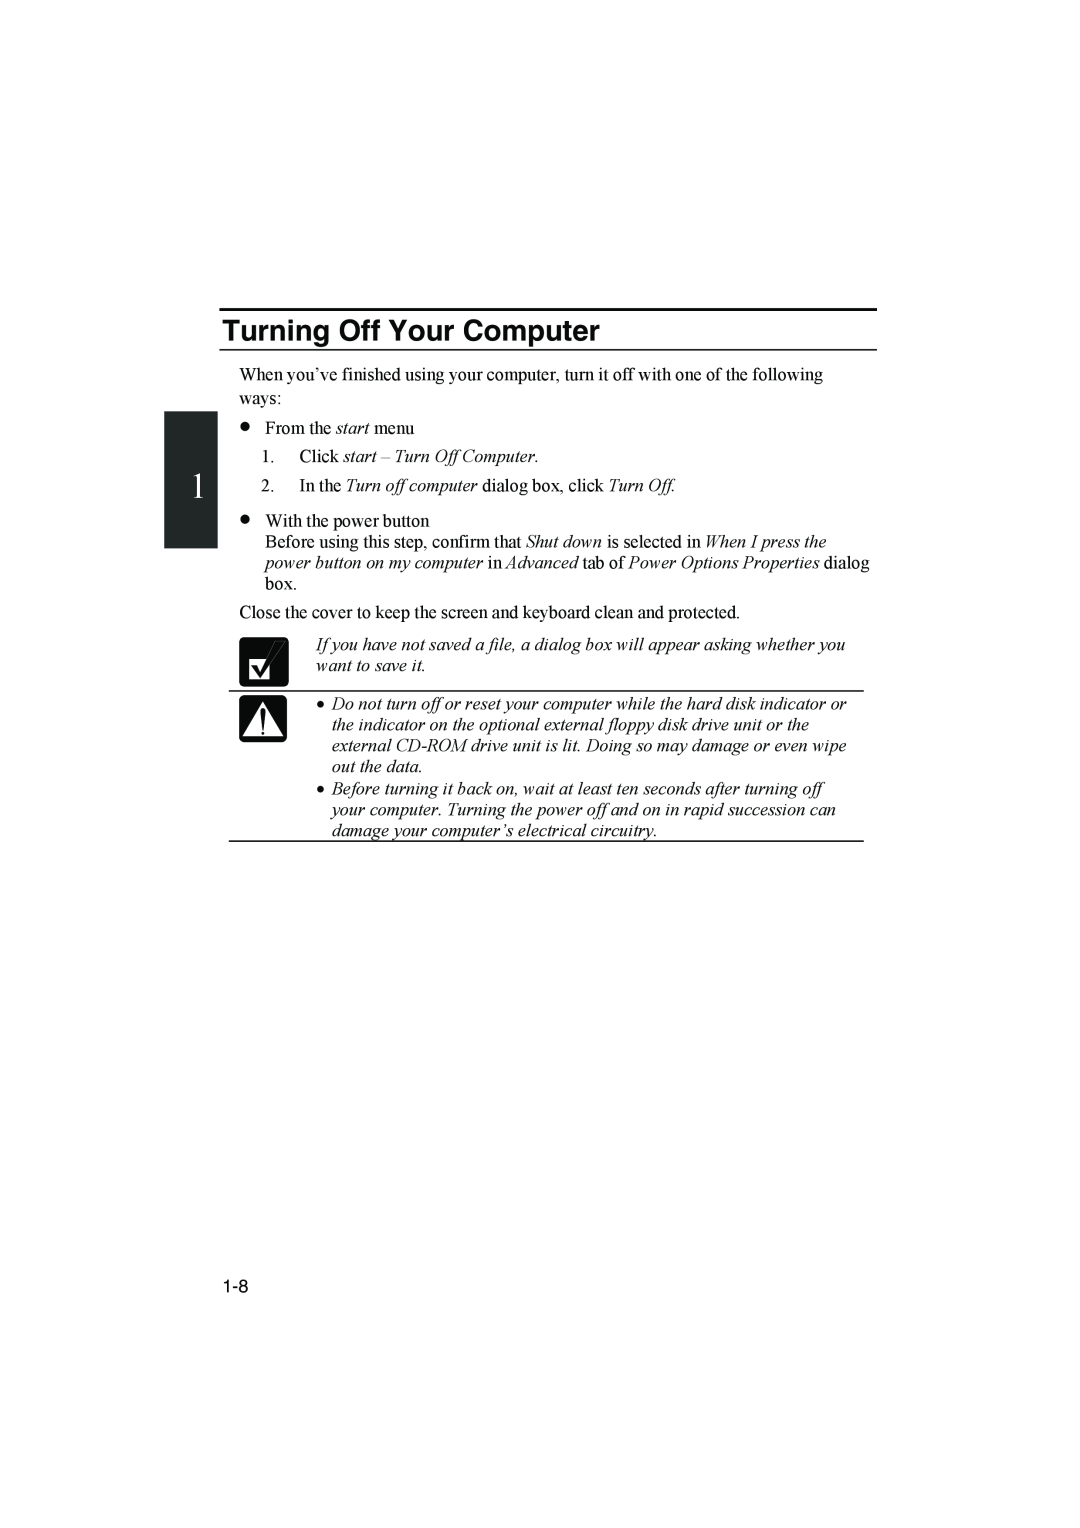 Sharp PC-MM1 manual Turning Off Your Computer 